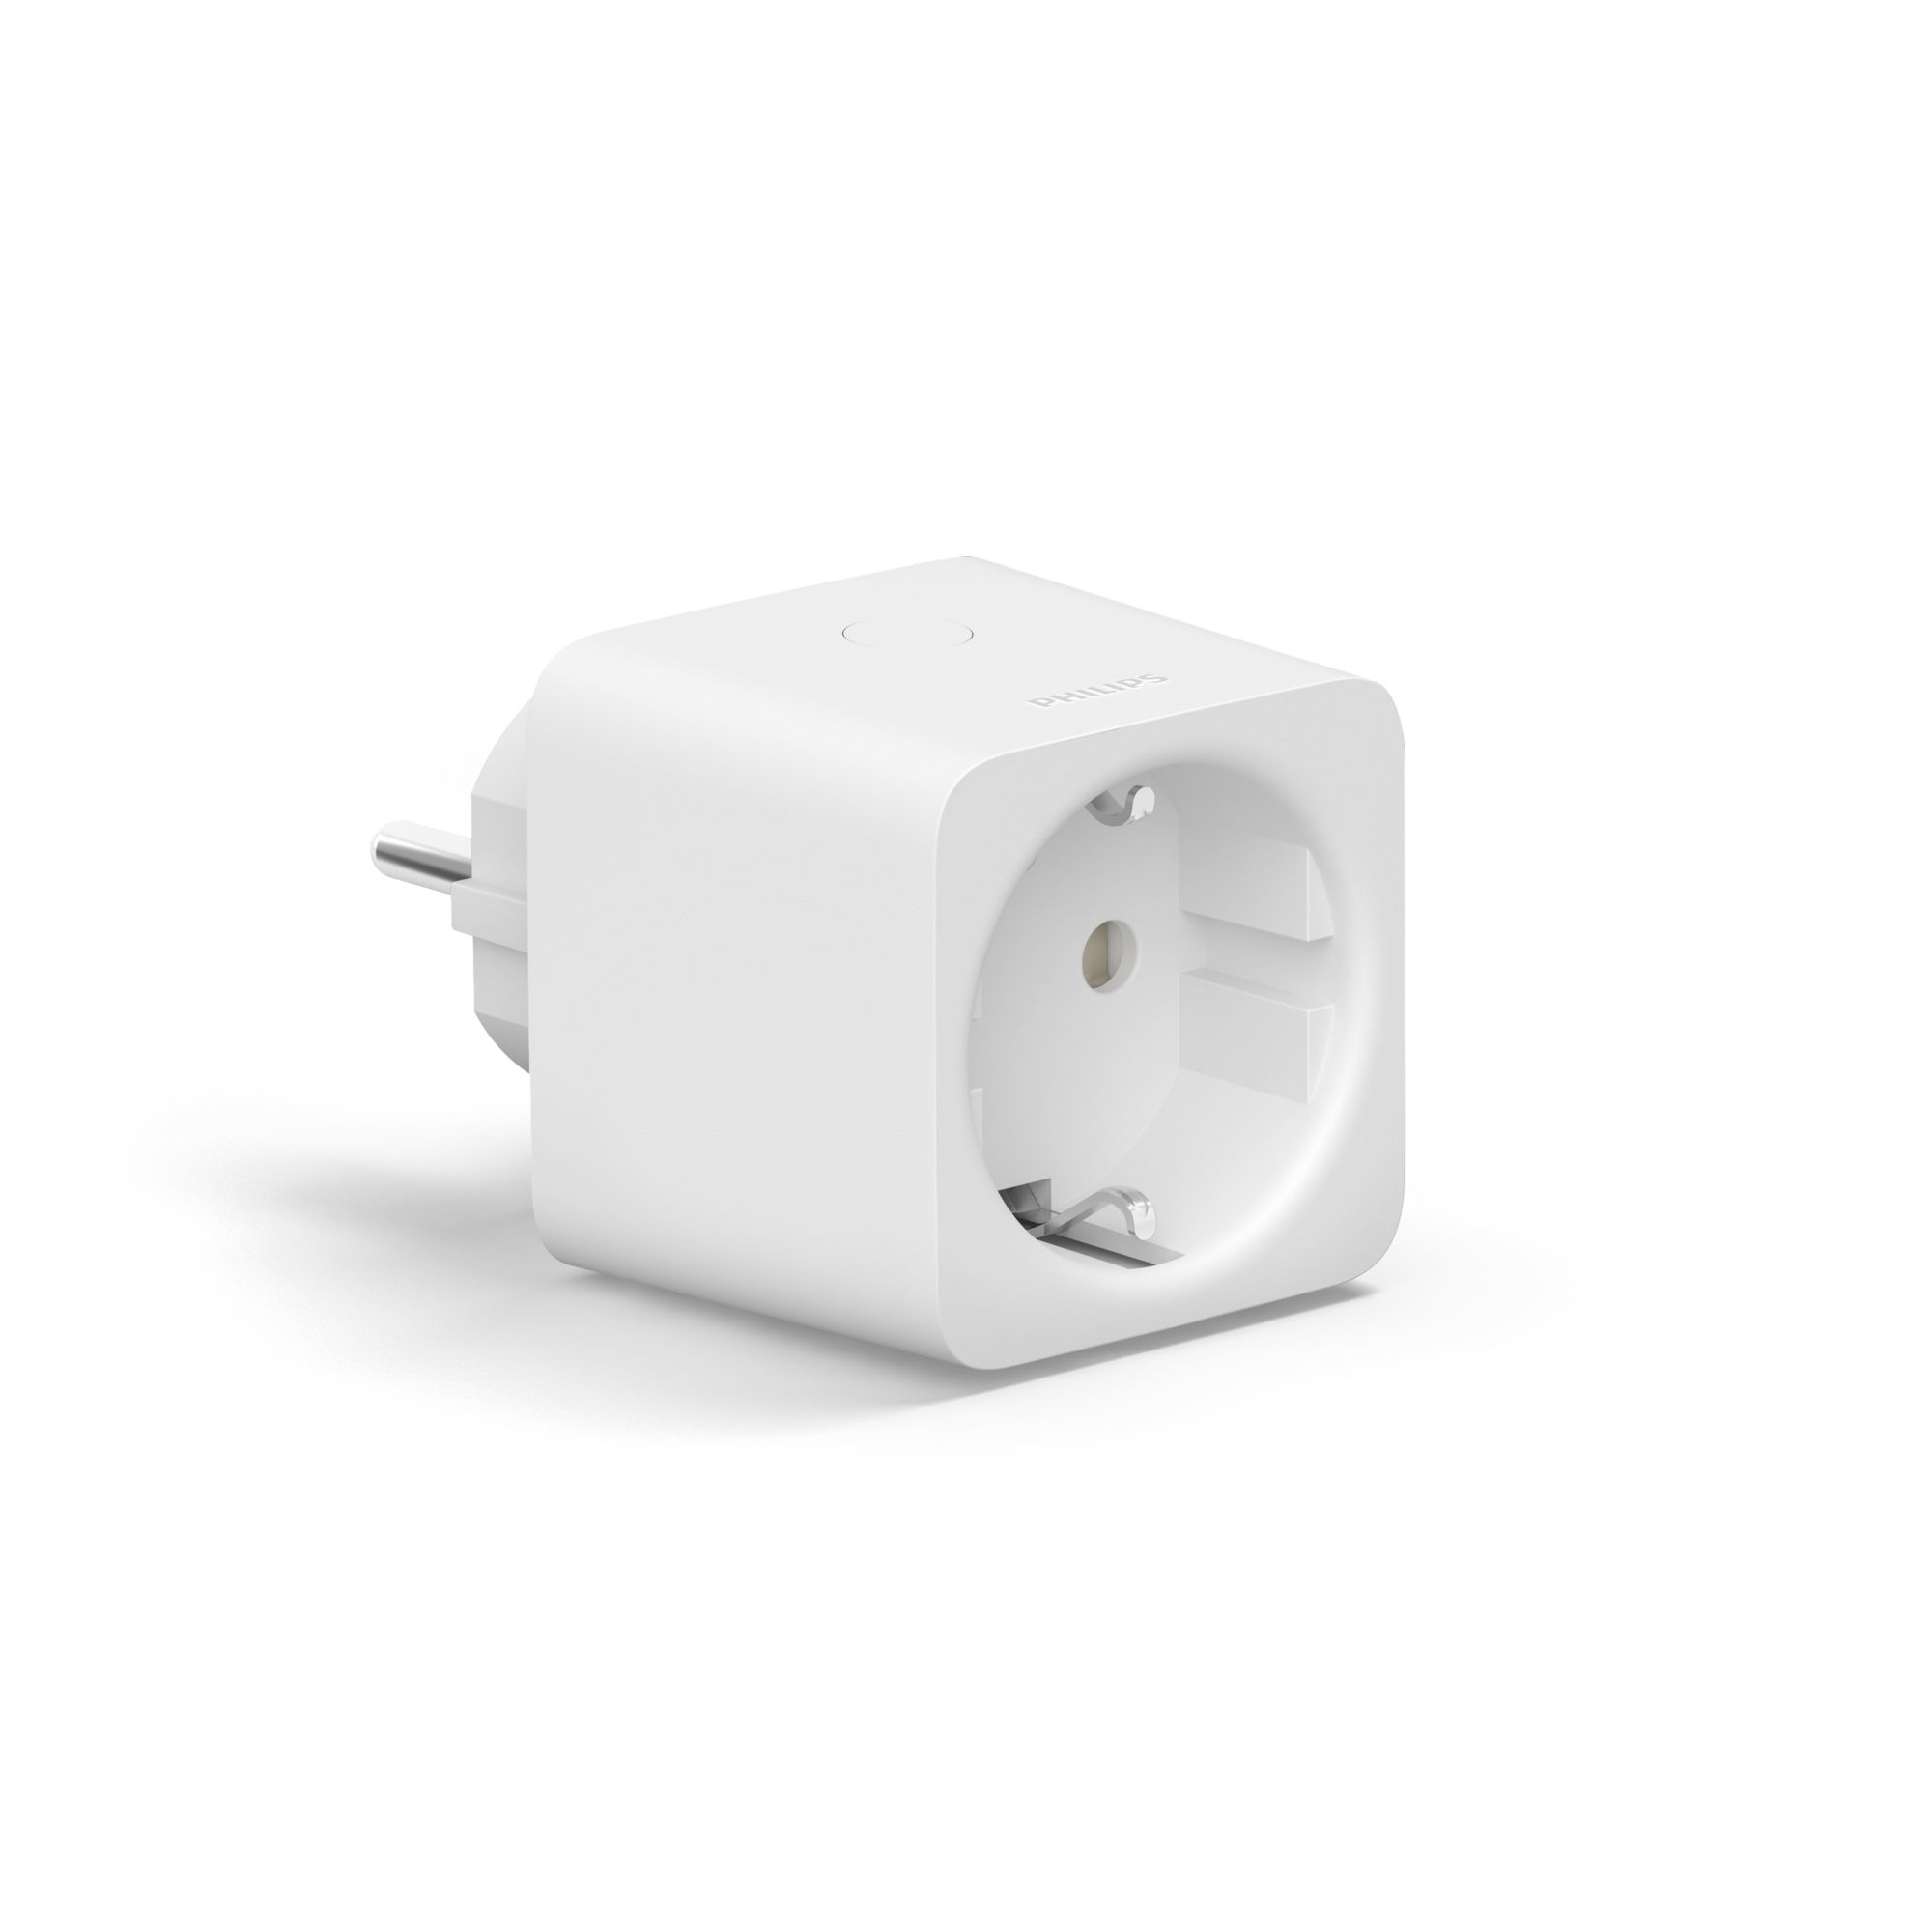 Philips by Signify Smart plug